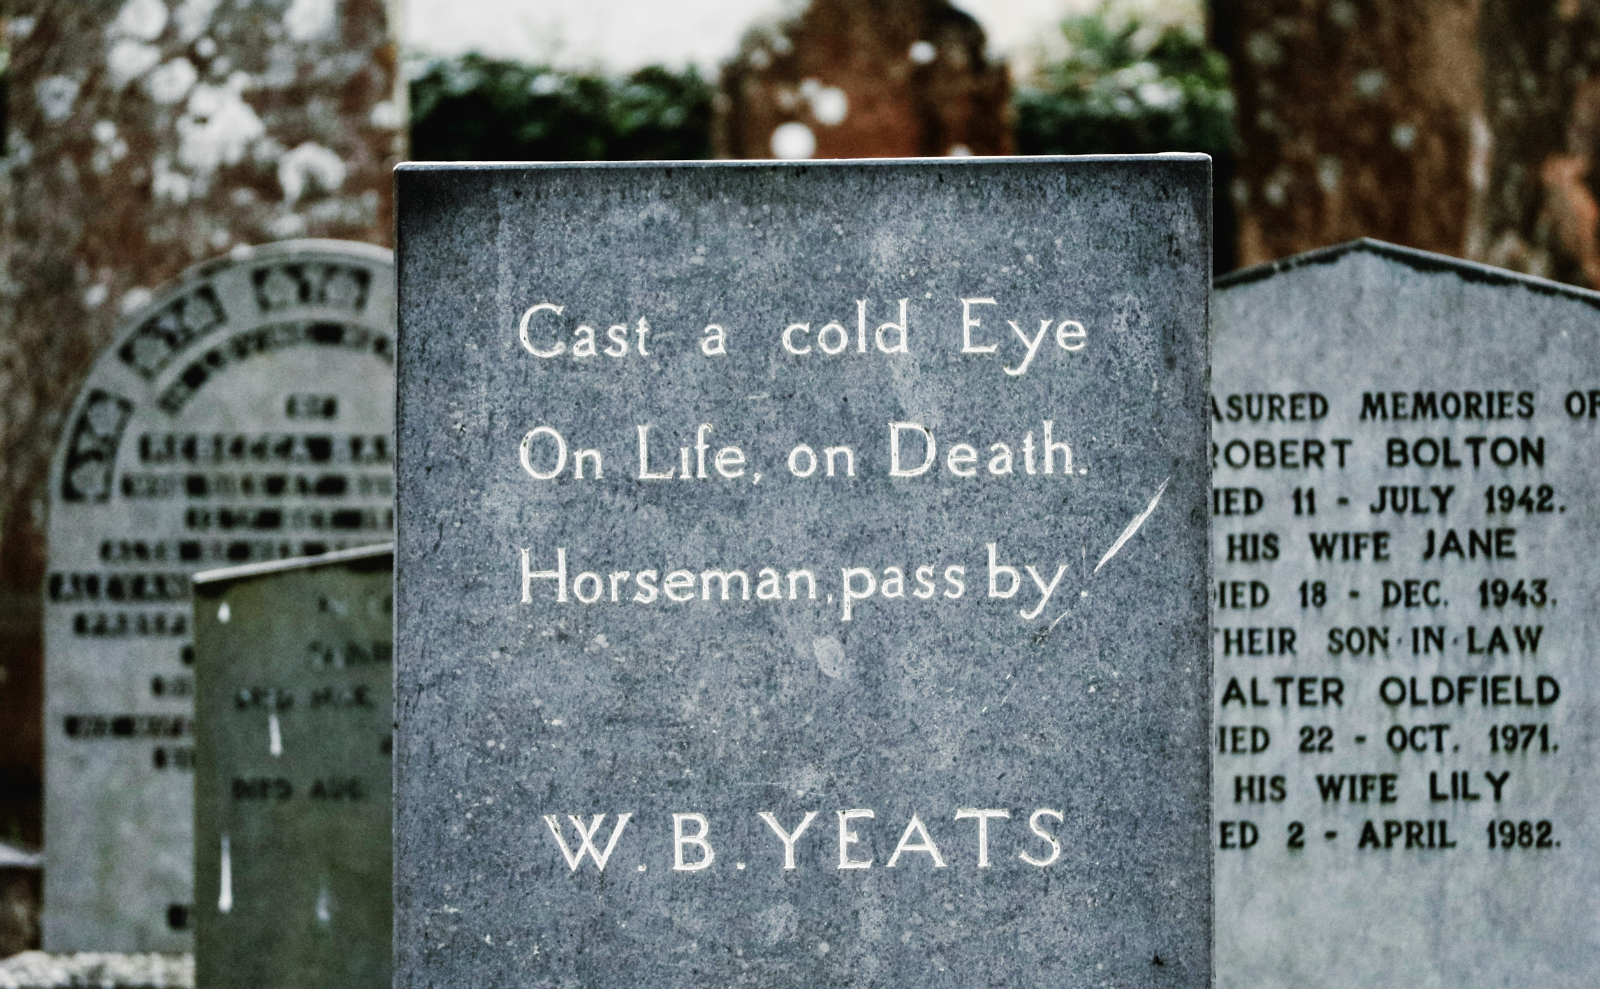 gray tombstone at wb yeats tomb that says cast a cold eye on life on death / horseman pass by